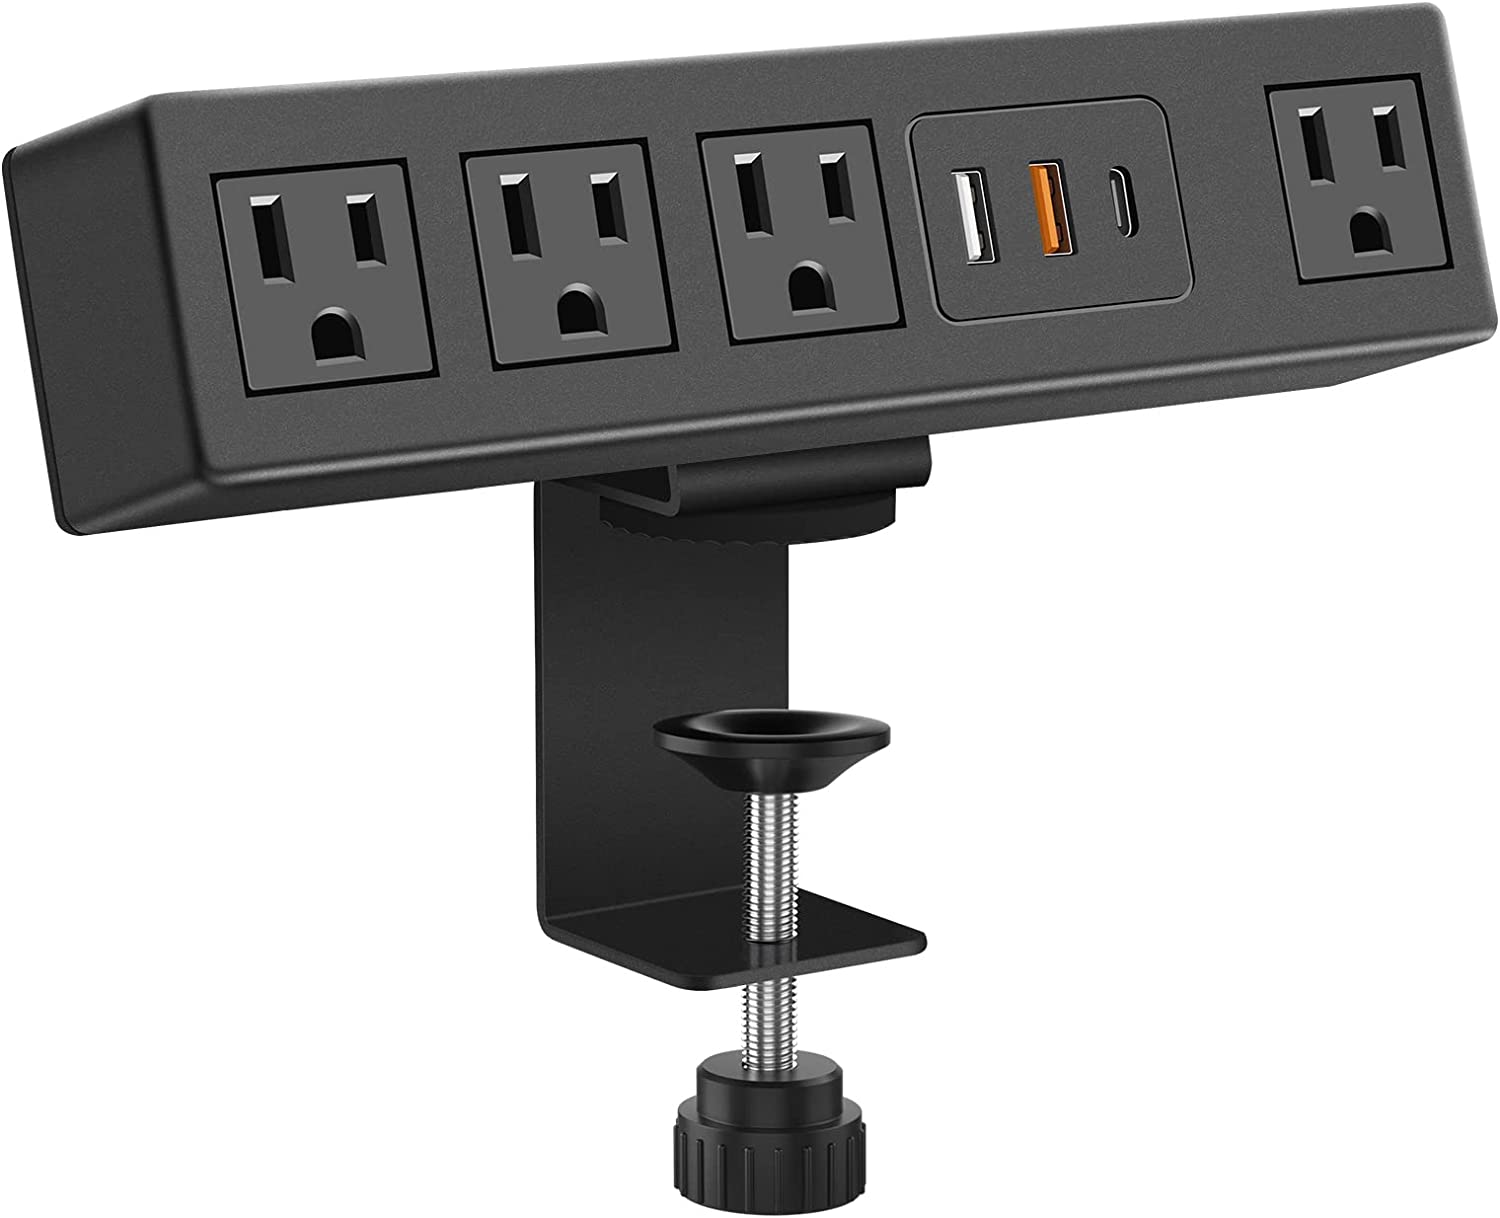 Amazon Prime Members: CCCEI 1200J Desk Clamp Power Strip w/ 9 AC Outlet, 1 USB-C, 1 QC USB-A, 2 USB-A $19.99 + Free Shipping